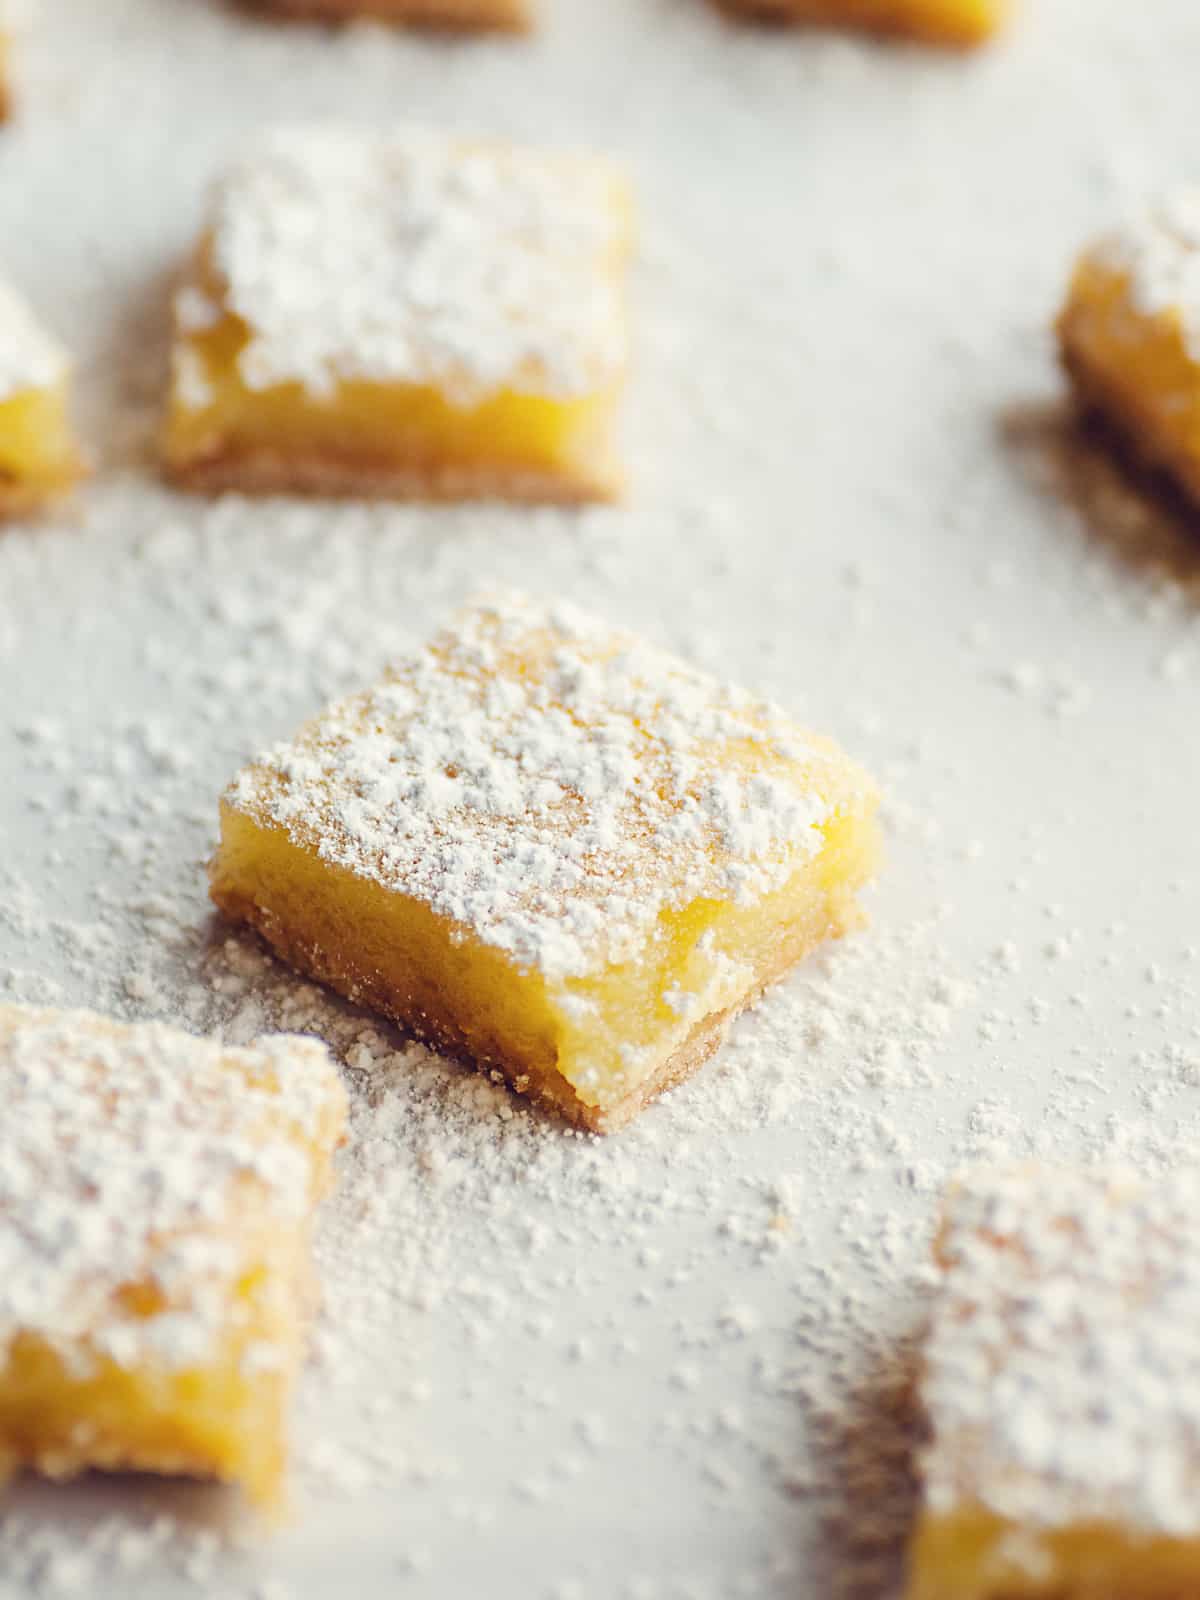 sliced creamy lemon bars on a parchment paper sprinkled with powdered sugar